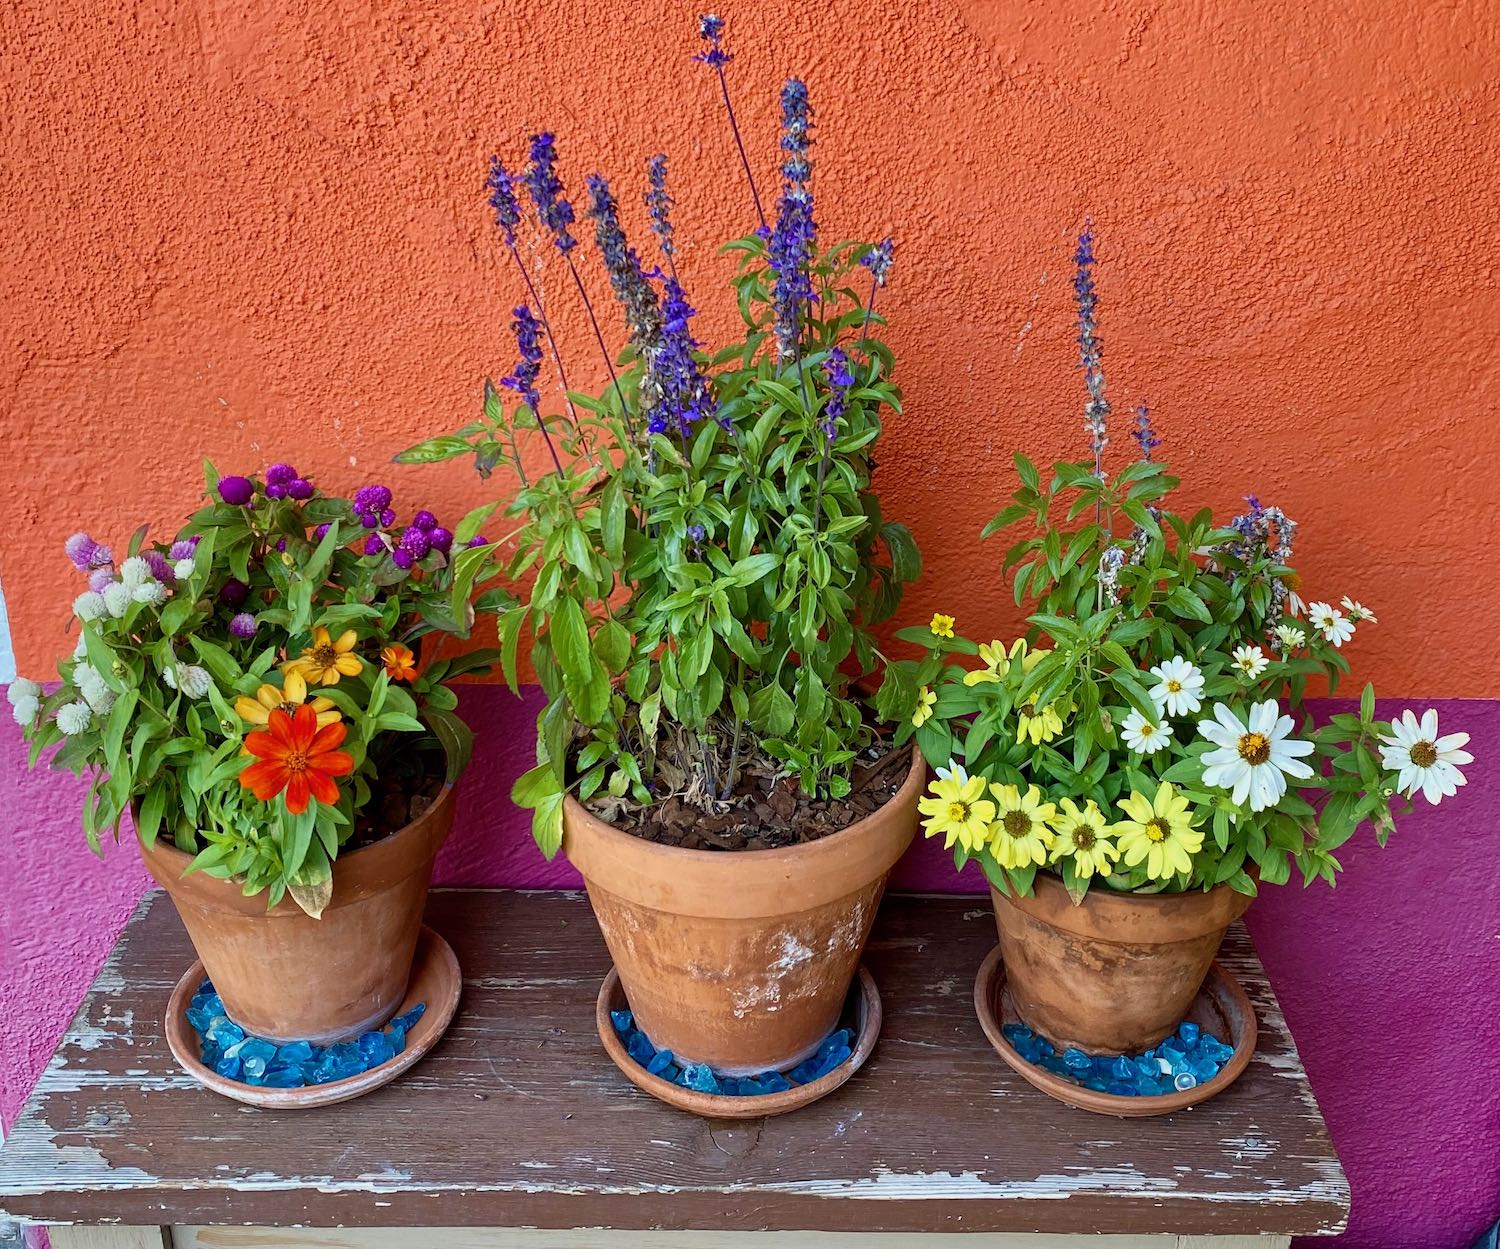 Flowers in Clay Pots Against Orange Wall